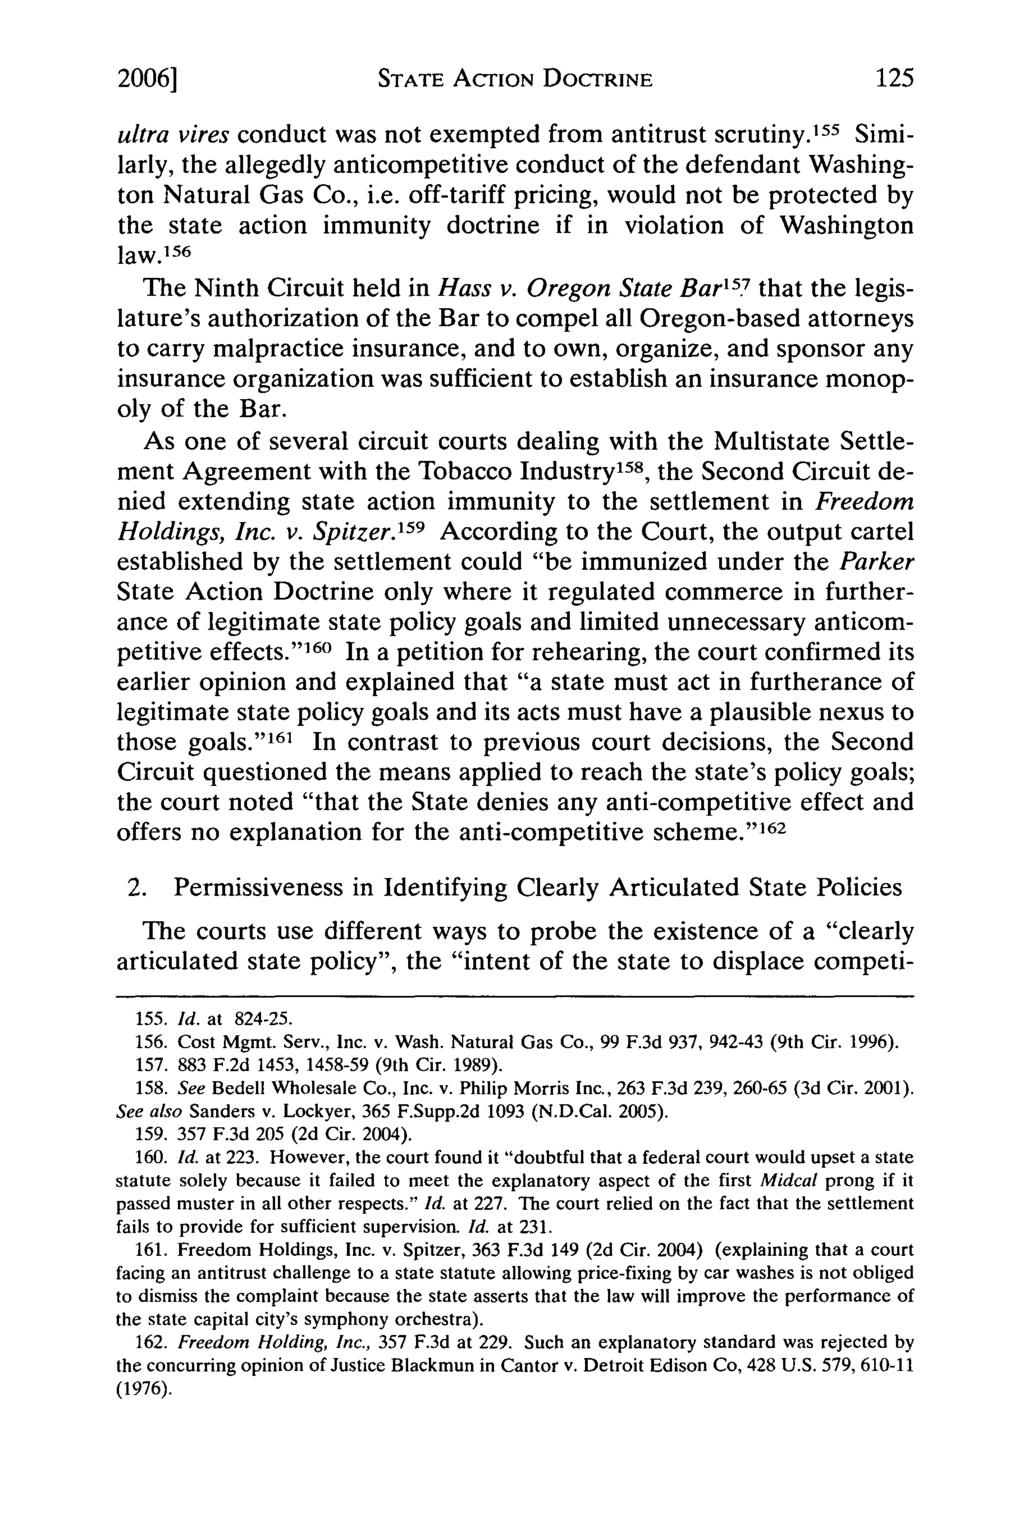 2006] STATE ACTION DOCTRINE ultra vires conduct was not exempted from antitrust scrutiny. 155 Similarly, the allegedly anticompetitive conduct of the defendant Washington Natural Gas Co., i.e. off-tariff pricing, would not be protected by the state action immunity doctrine if in violation of Washington law.